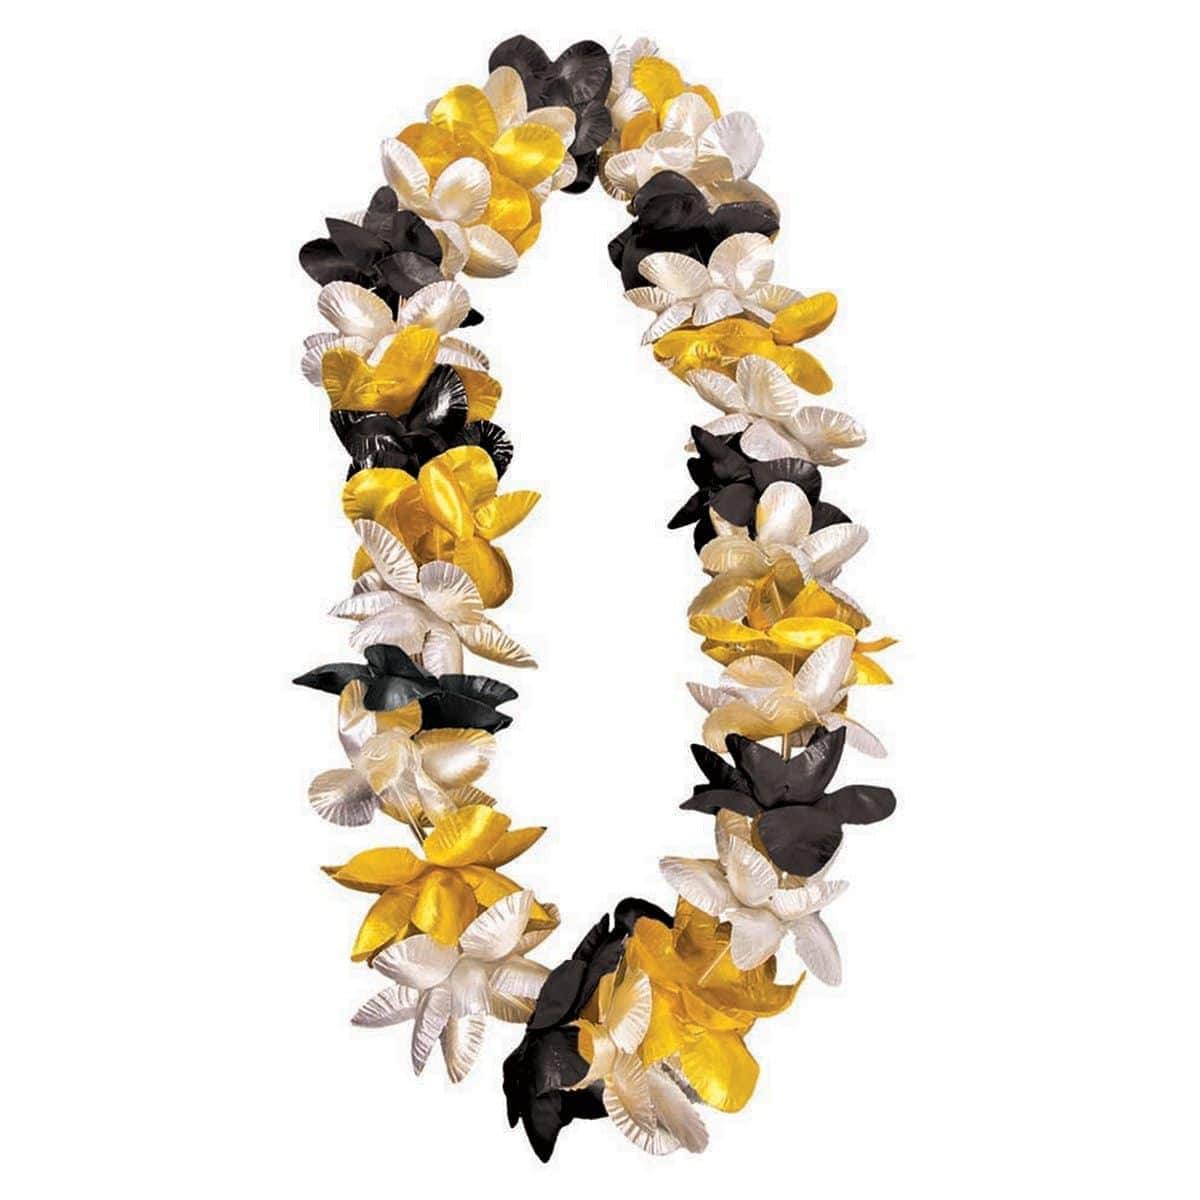 Buy Theme Party Black, Gold & Silver Flower Lei Necklace sold at Party Expert